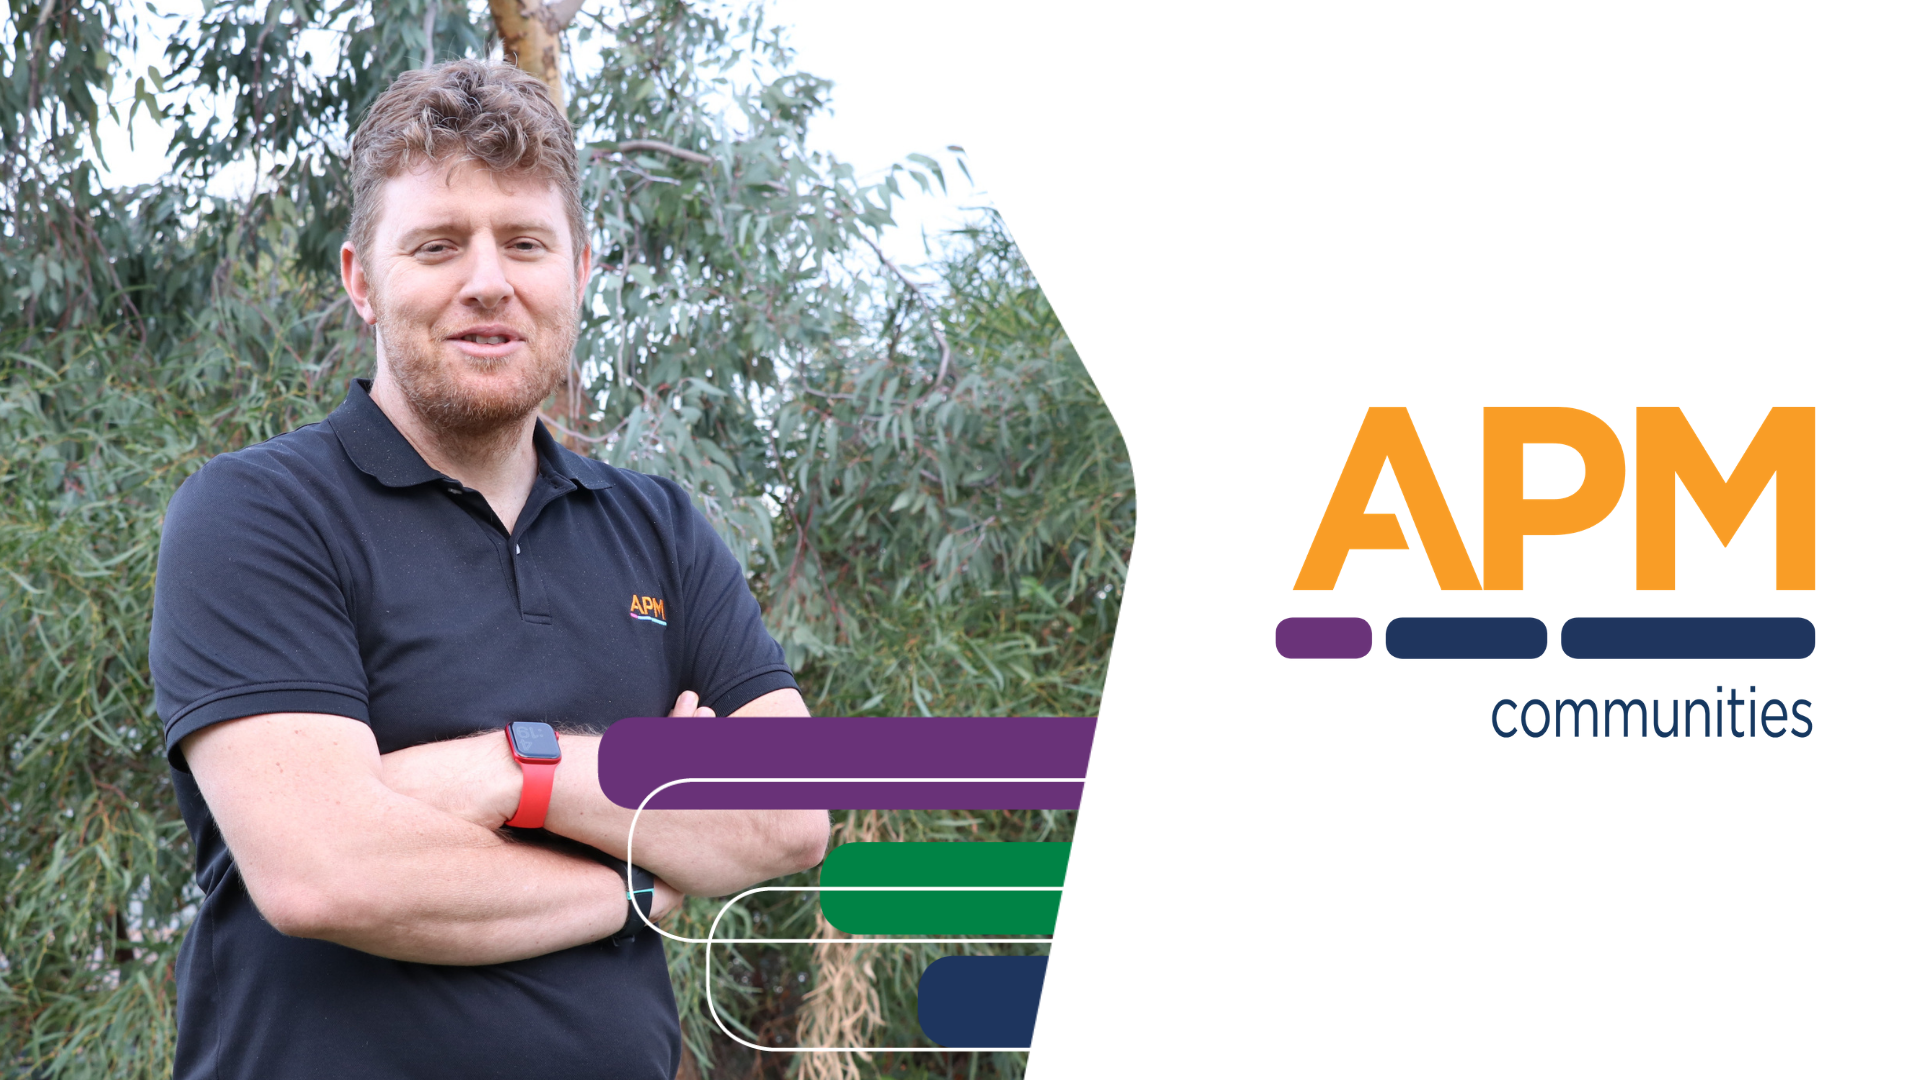 Ben is pictured standing straight with his arms folded, pictured next to the APM Communities logo